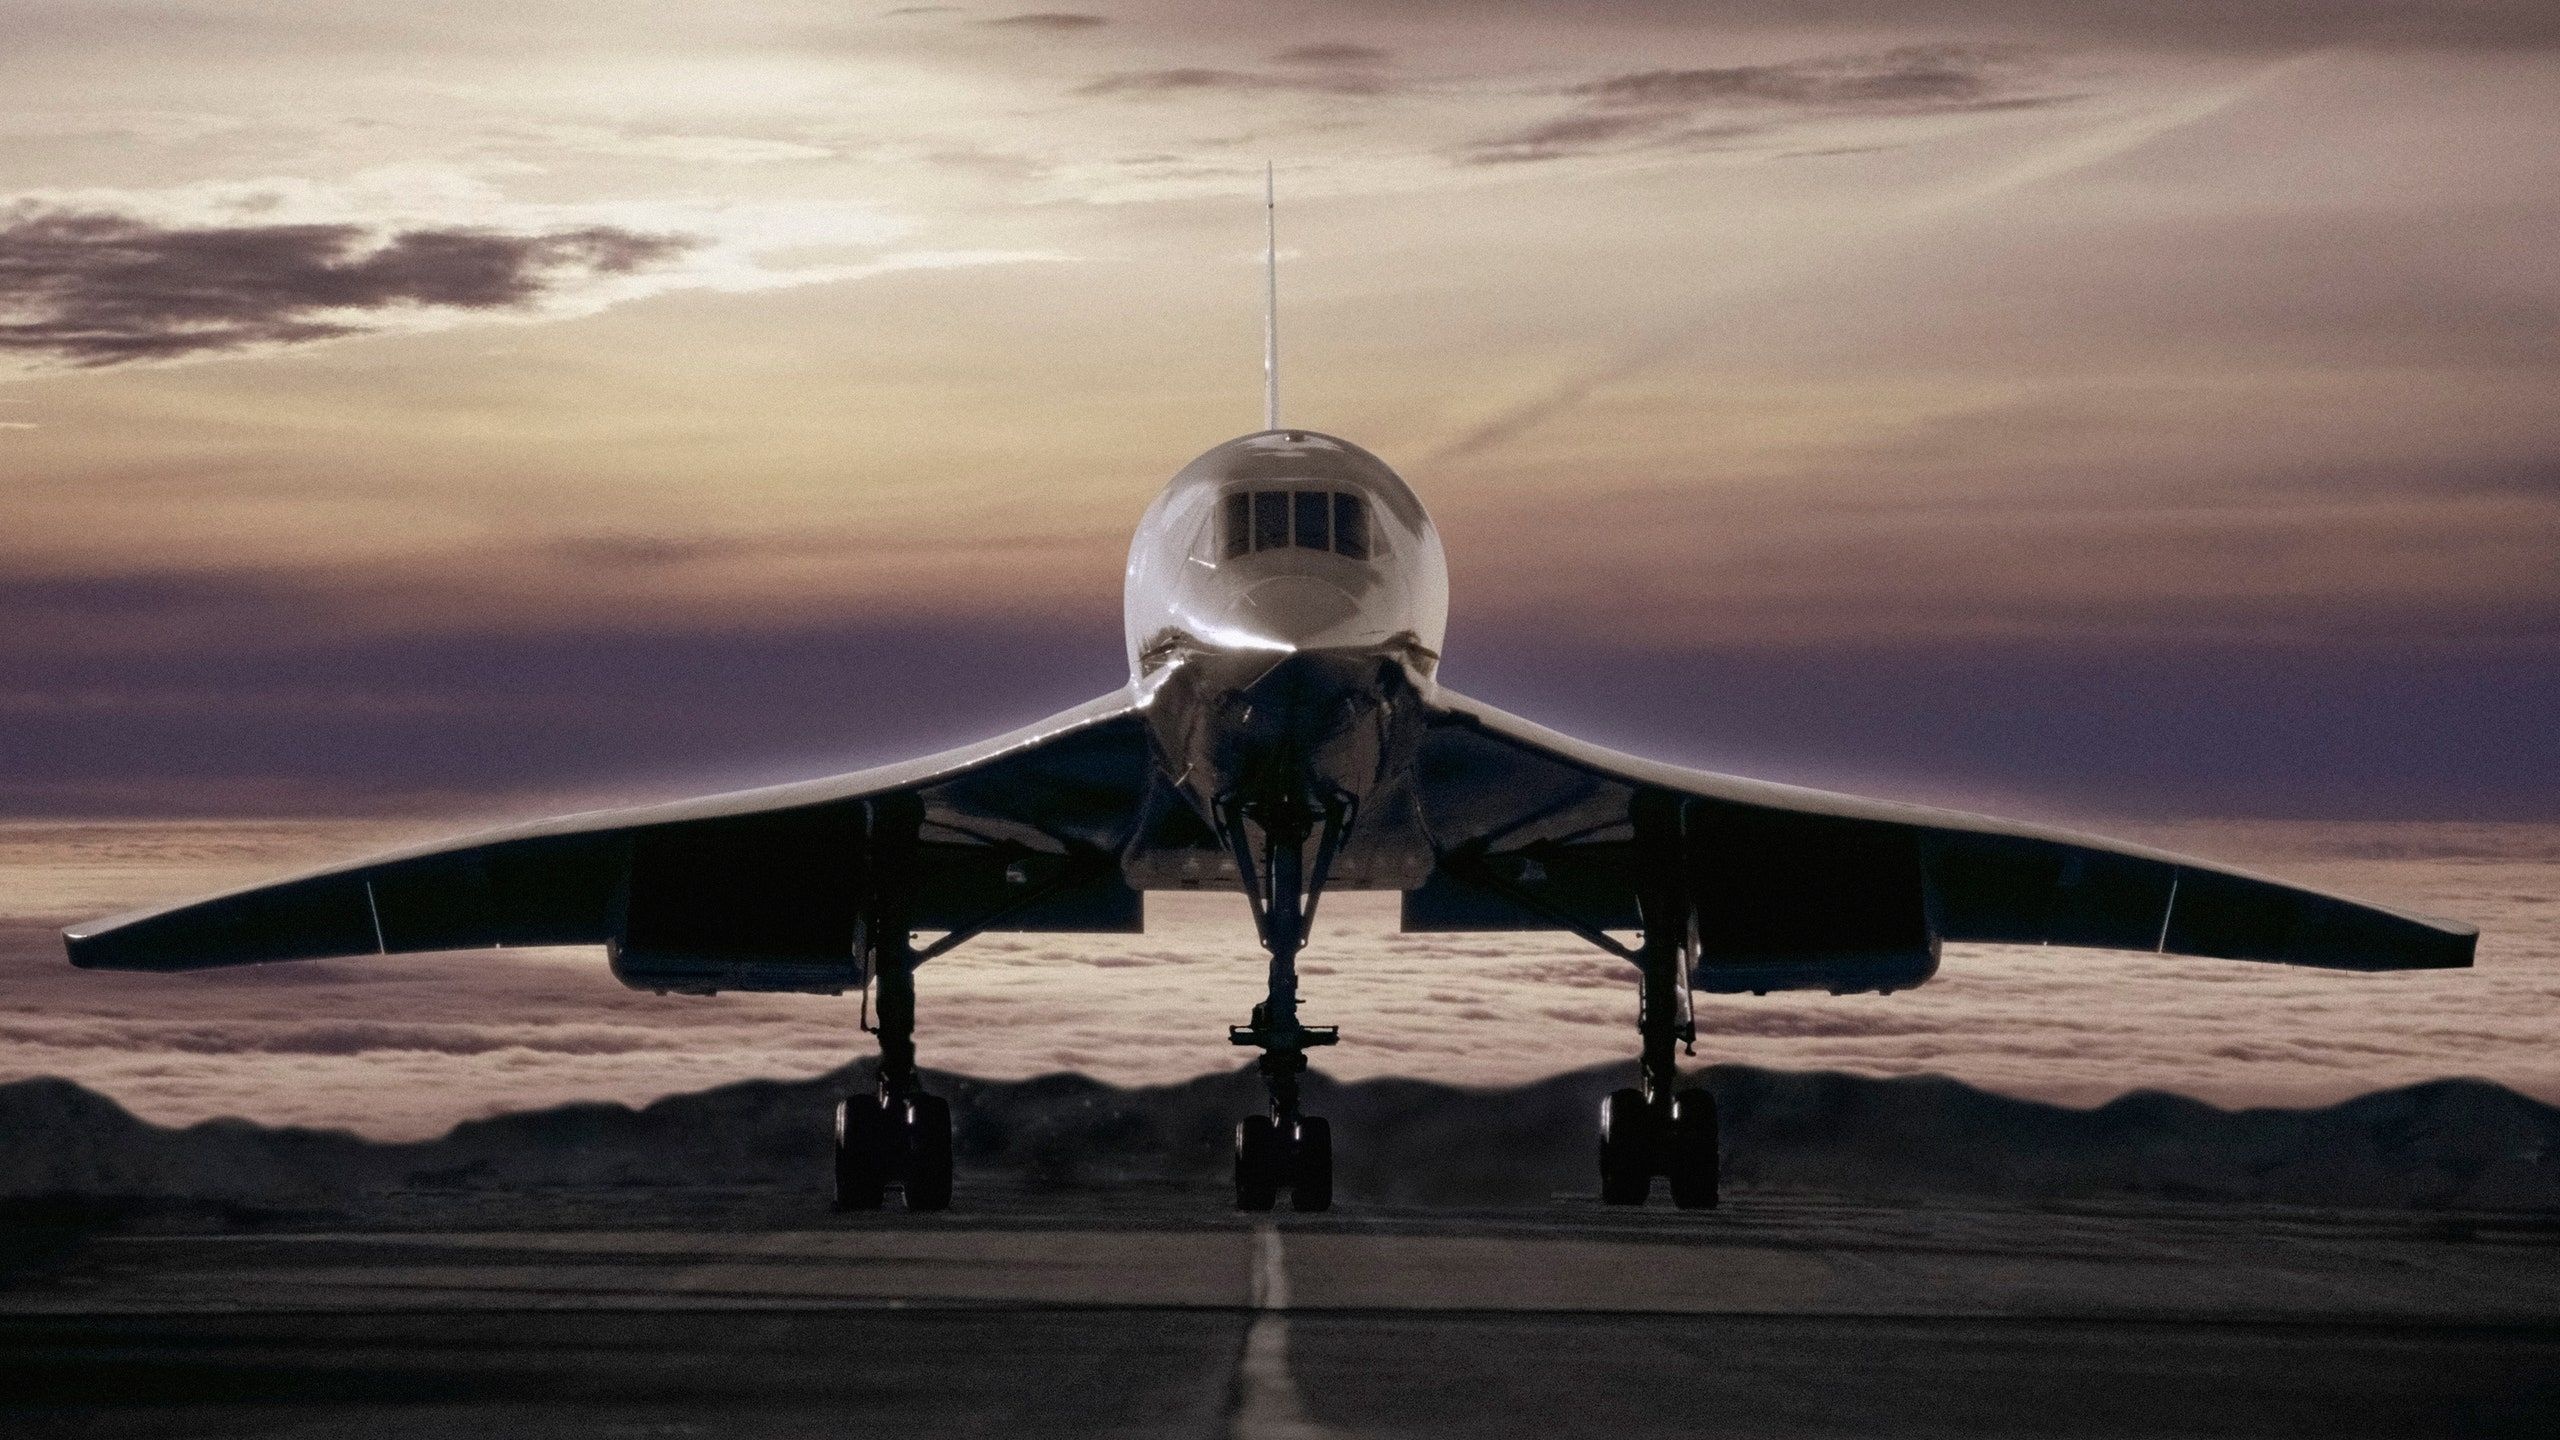 Concorde wallpapers, Top free backgrounds, Aviation enthusiasts, Aero wallpapers, 2560x1440 HD Desktop